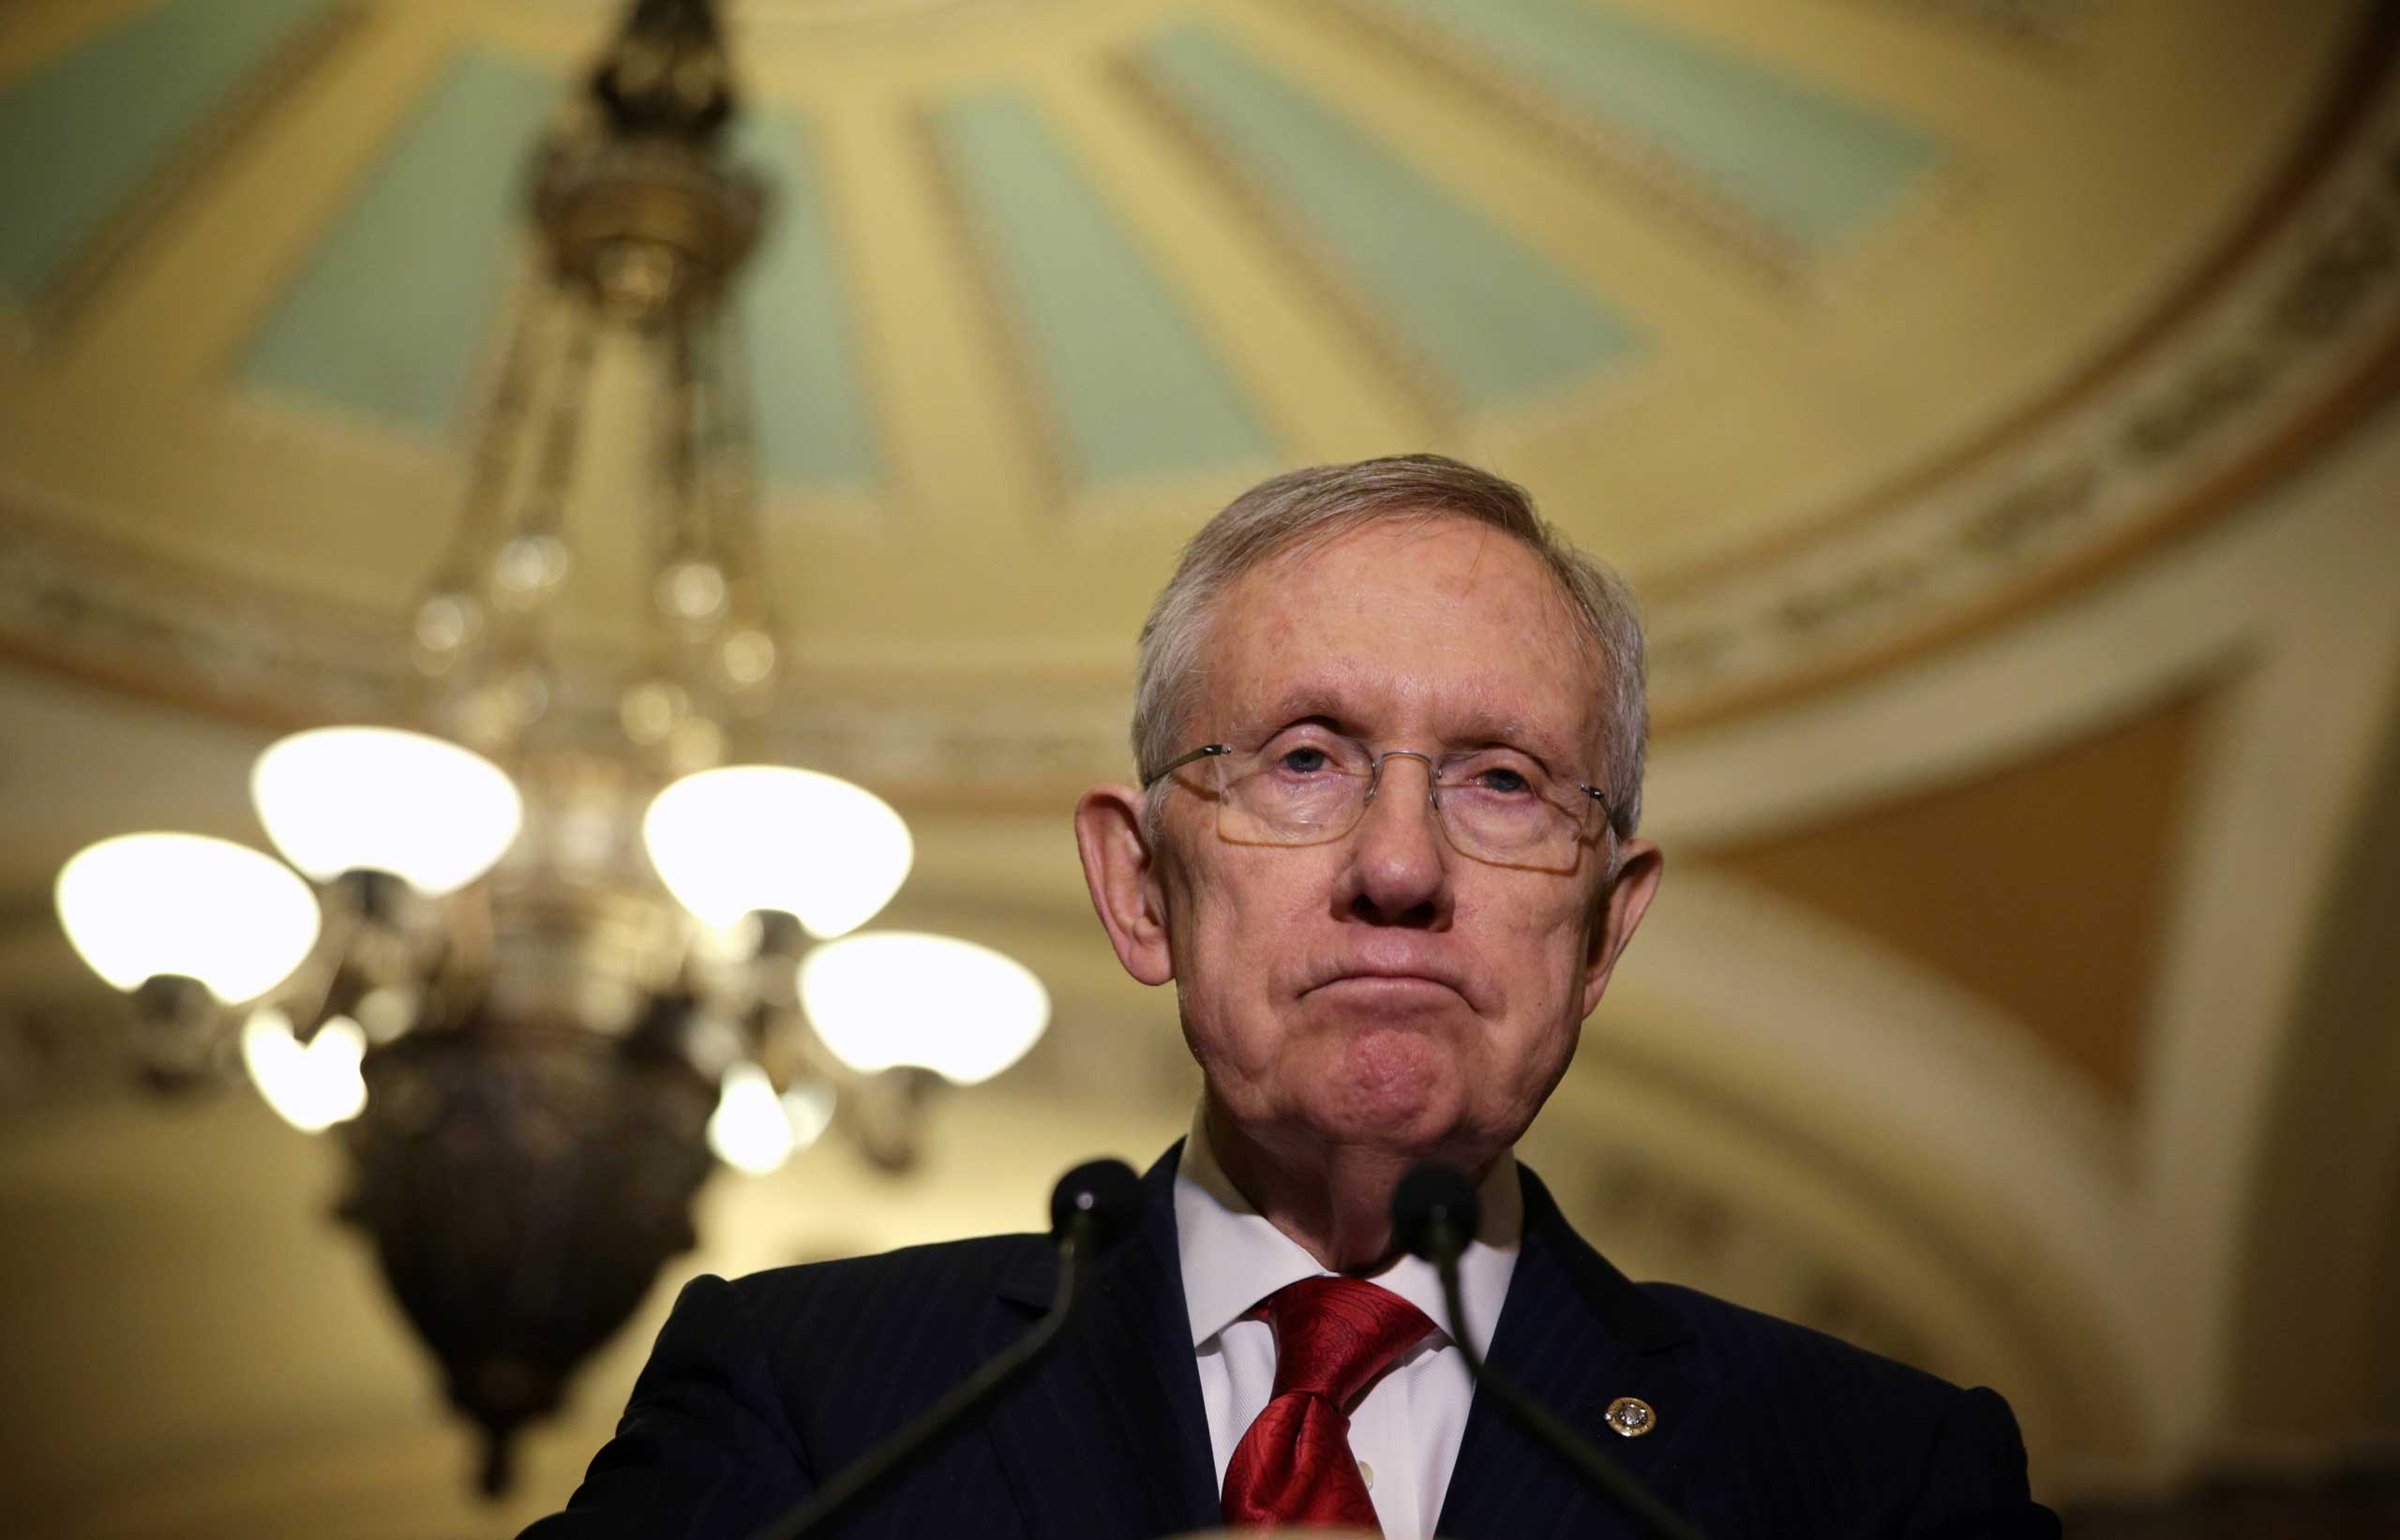 Senate Majority Leader Sen. Harry Reid speaks to members of the media after the Senate Democratic Policy Luncheon at the Capitol Dec. 9, 2014 on Capitol Hill in Washington, DC. (Alex Wong—Getty Images)